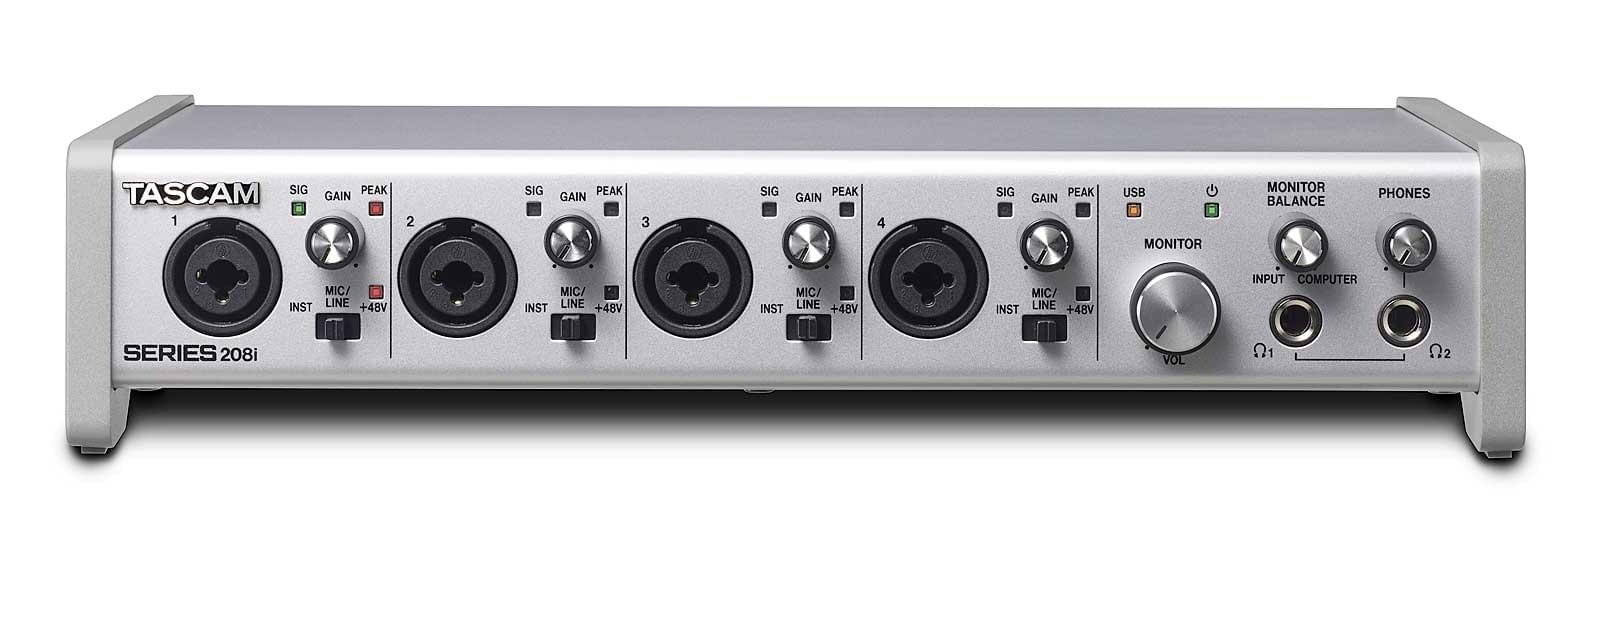 USB Audio/MIDI Interface With DSP Mixer (20 in, 8 out) | Tascam SERIES 208i